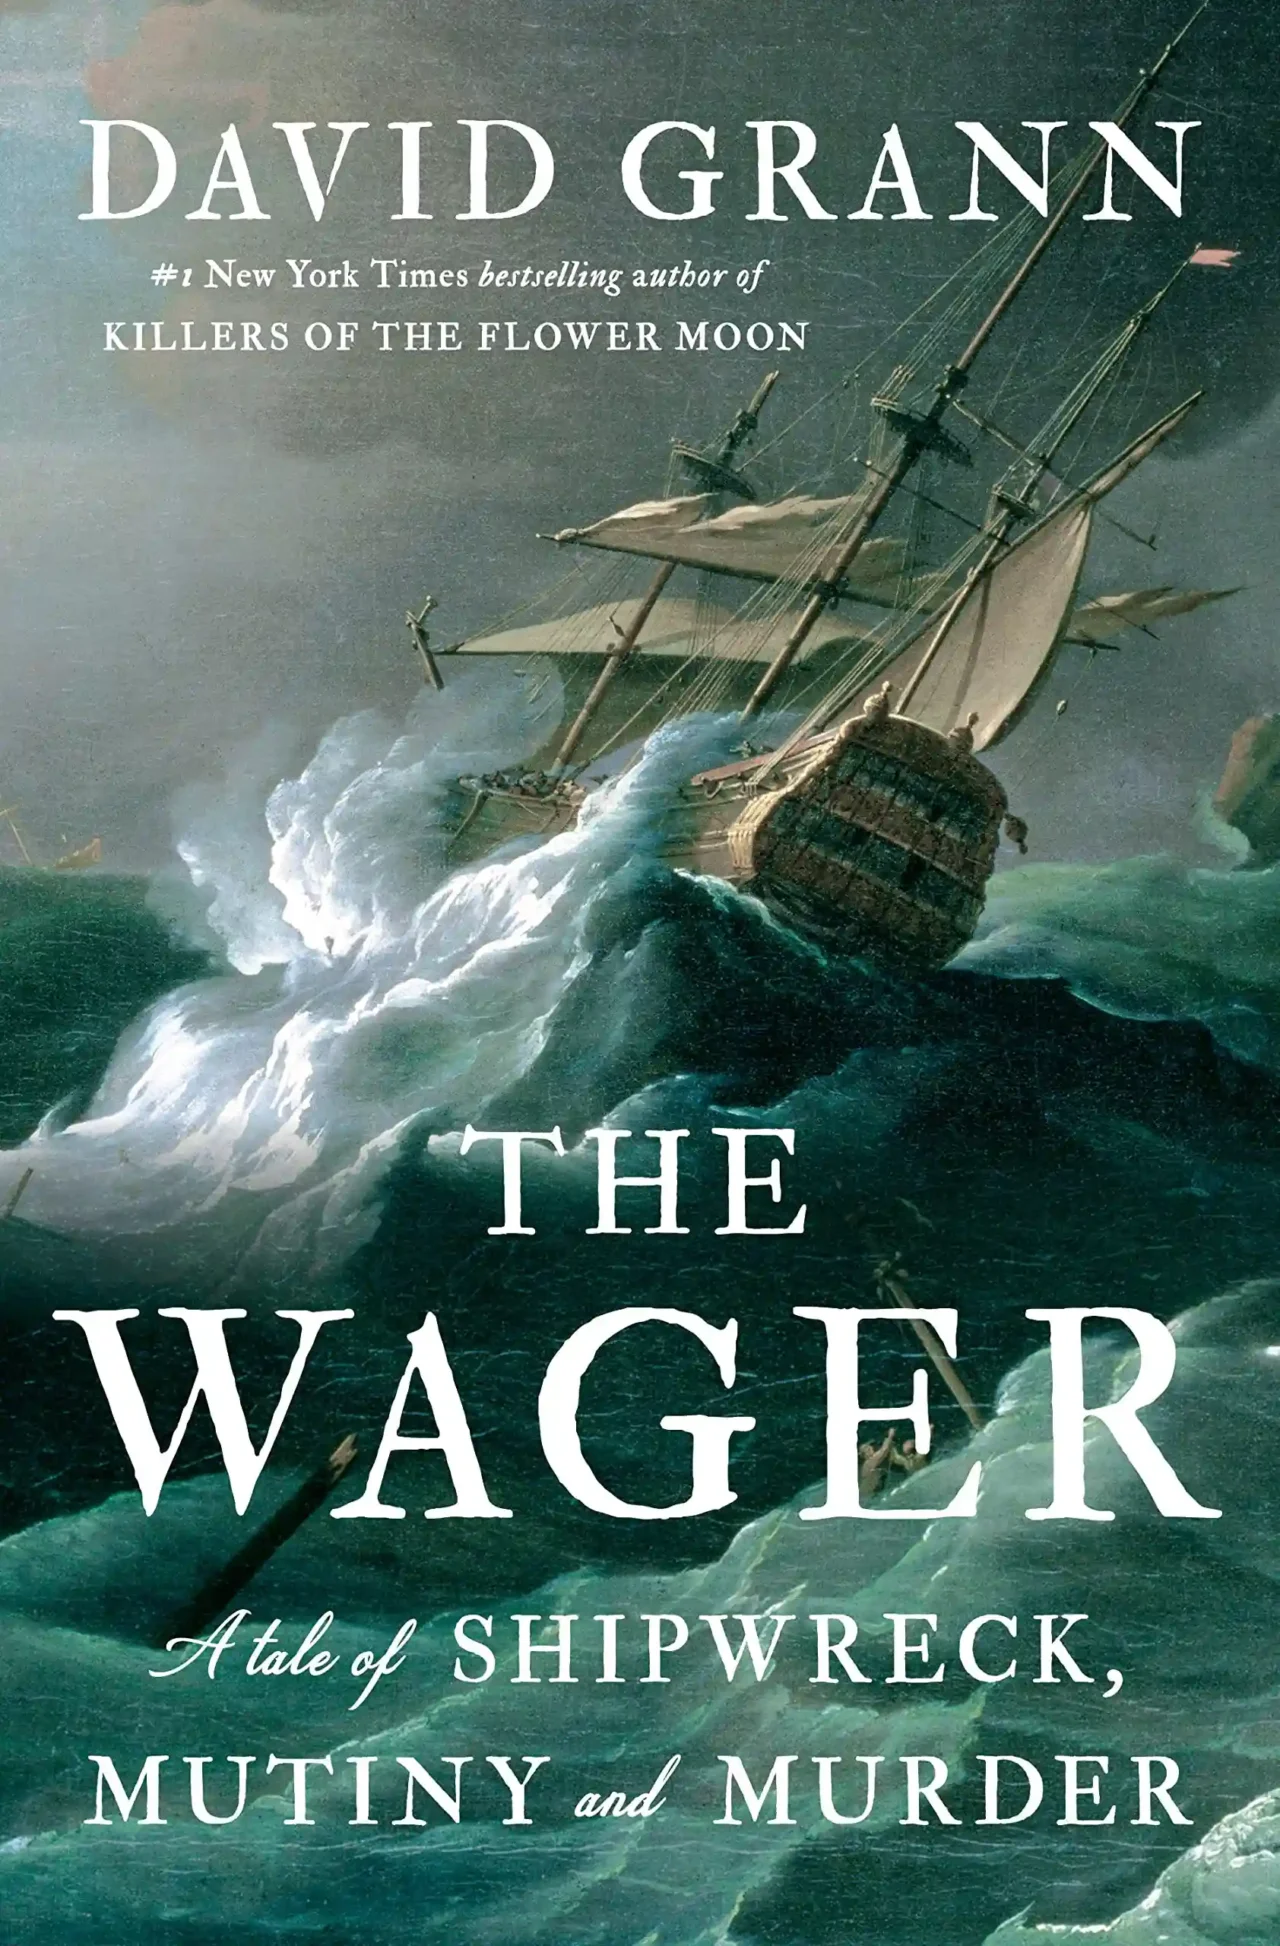 Leonardo DiCaprio The Wager A Tale of Shipwreck, Mutiny, and Murder.